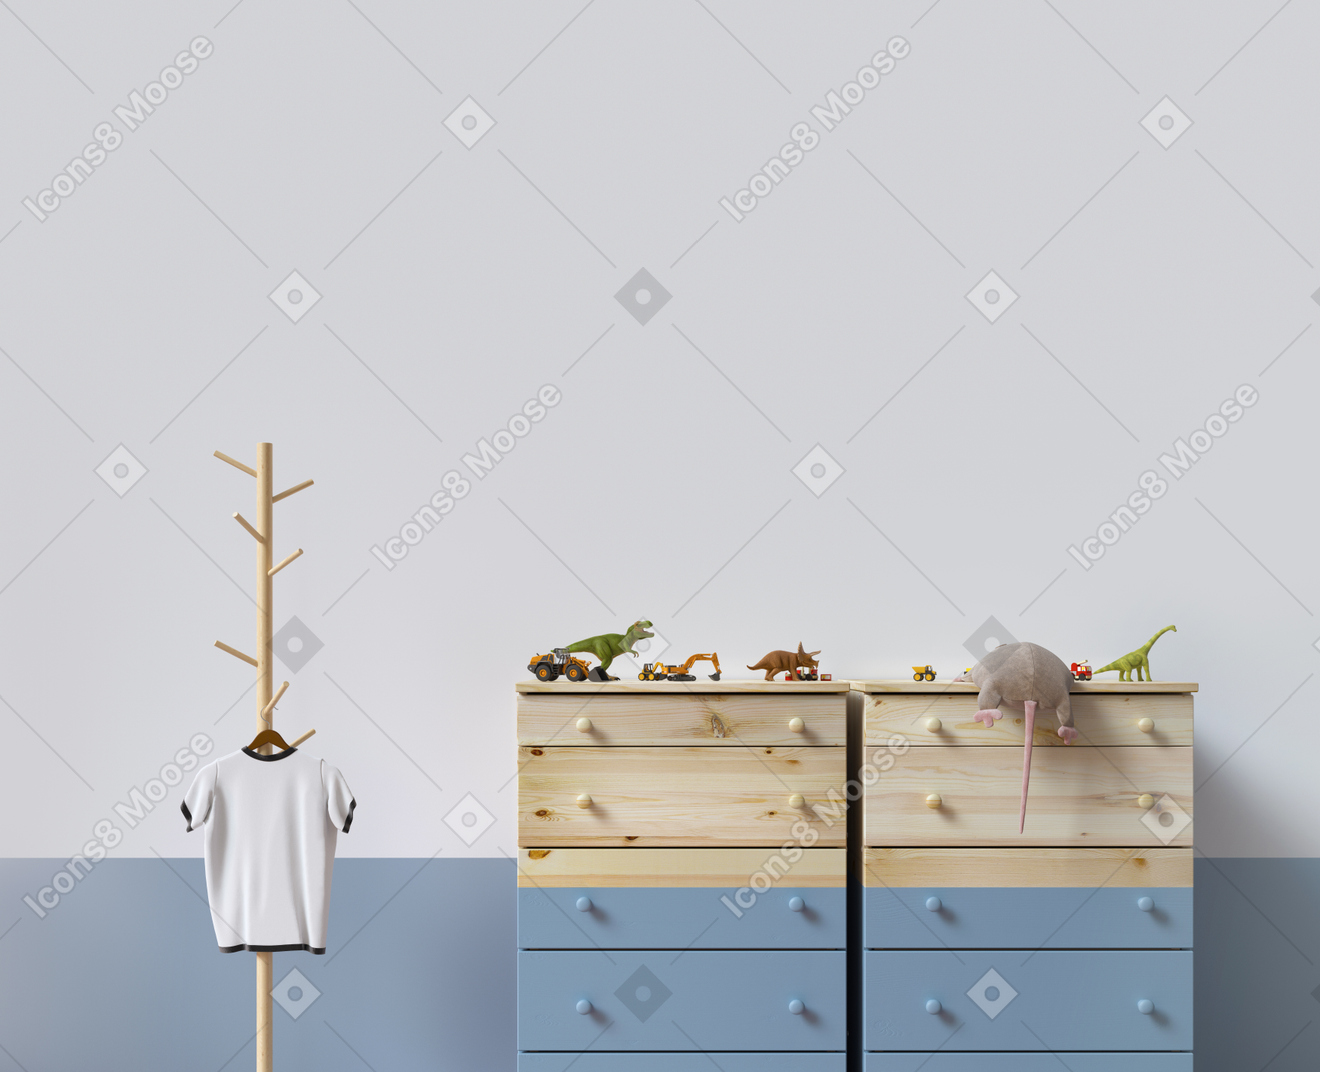 Children's room with a chest of drawers and hanger stand